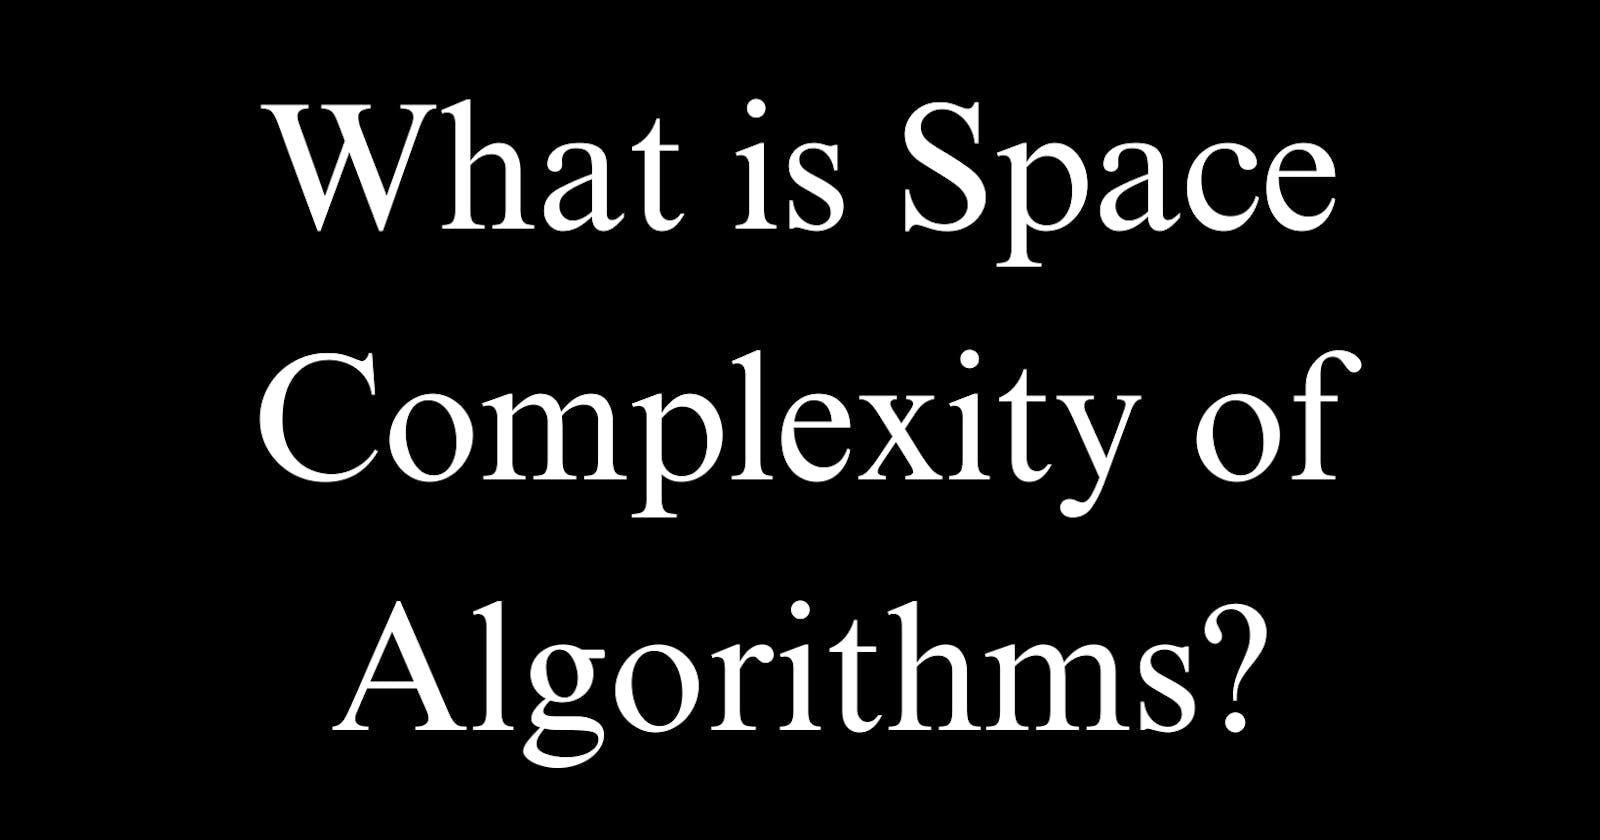 Space Complexity of Algorithms